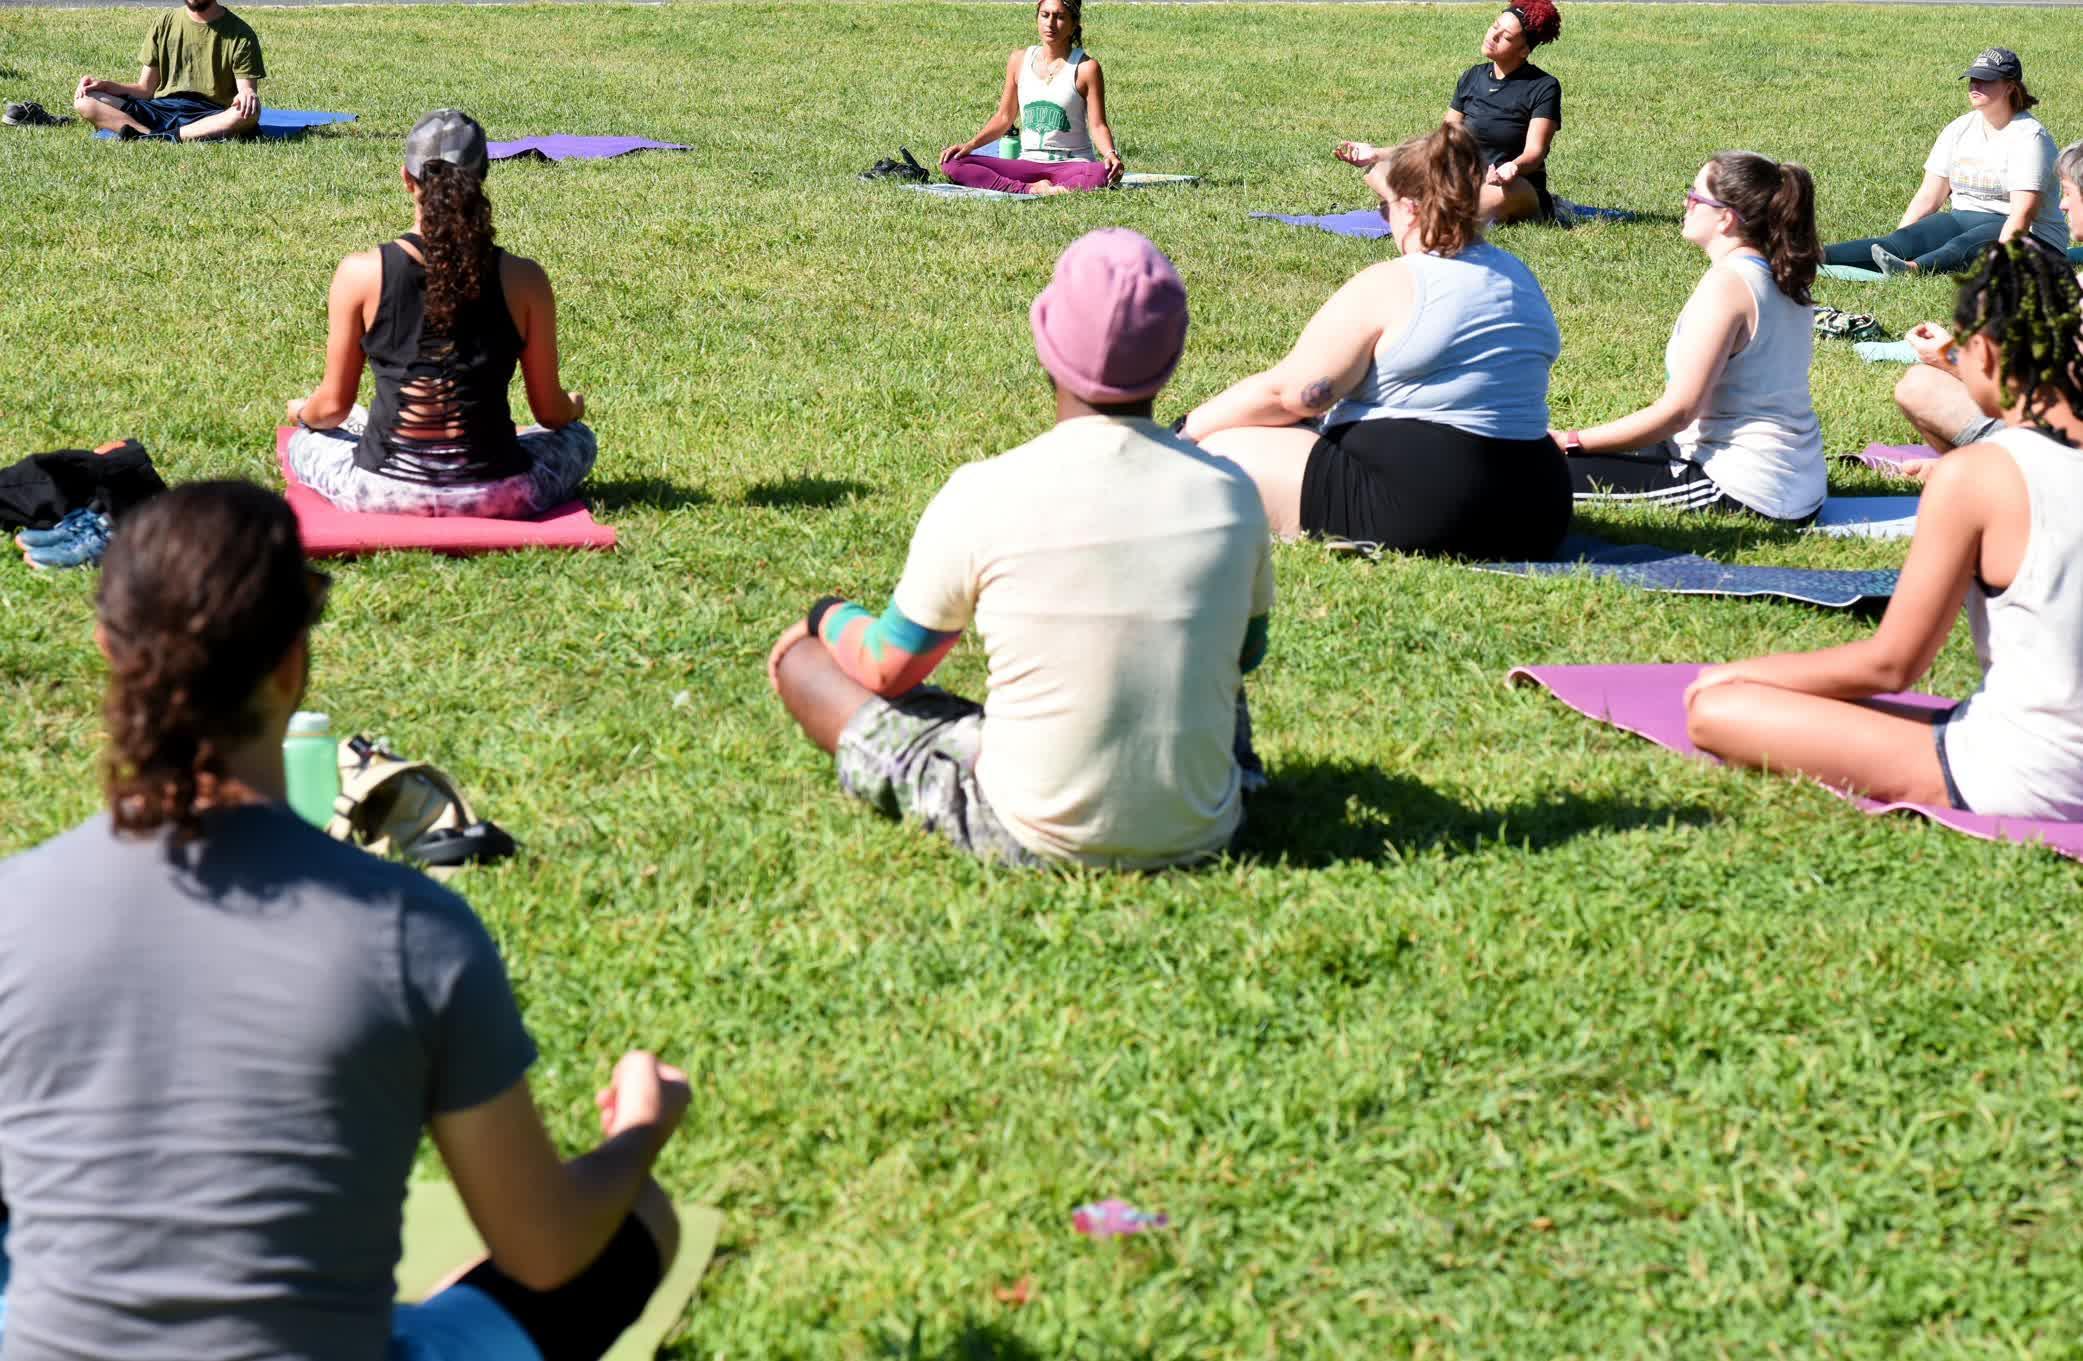 Close-up of people sitting in a circle on grass field with legs crossed and arms out doing Yoga.